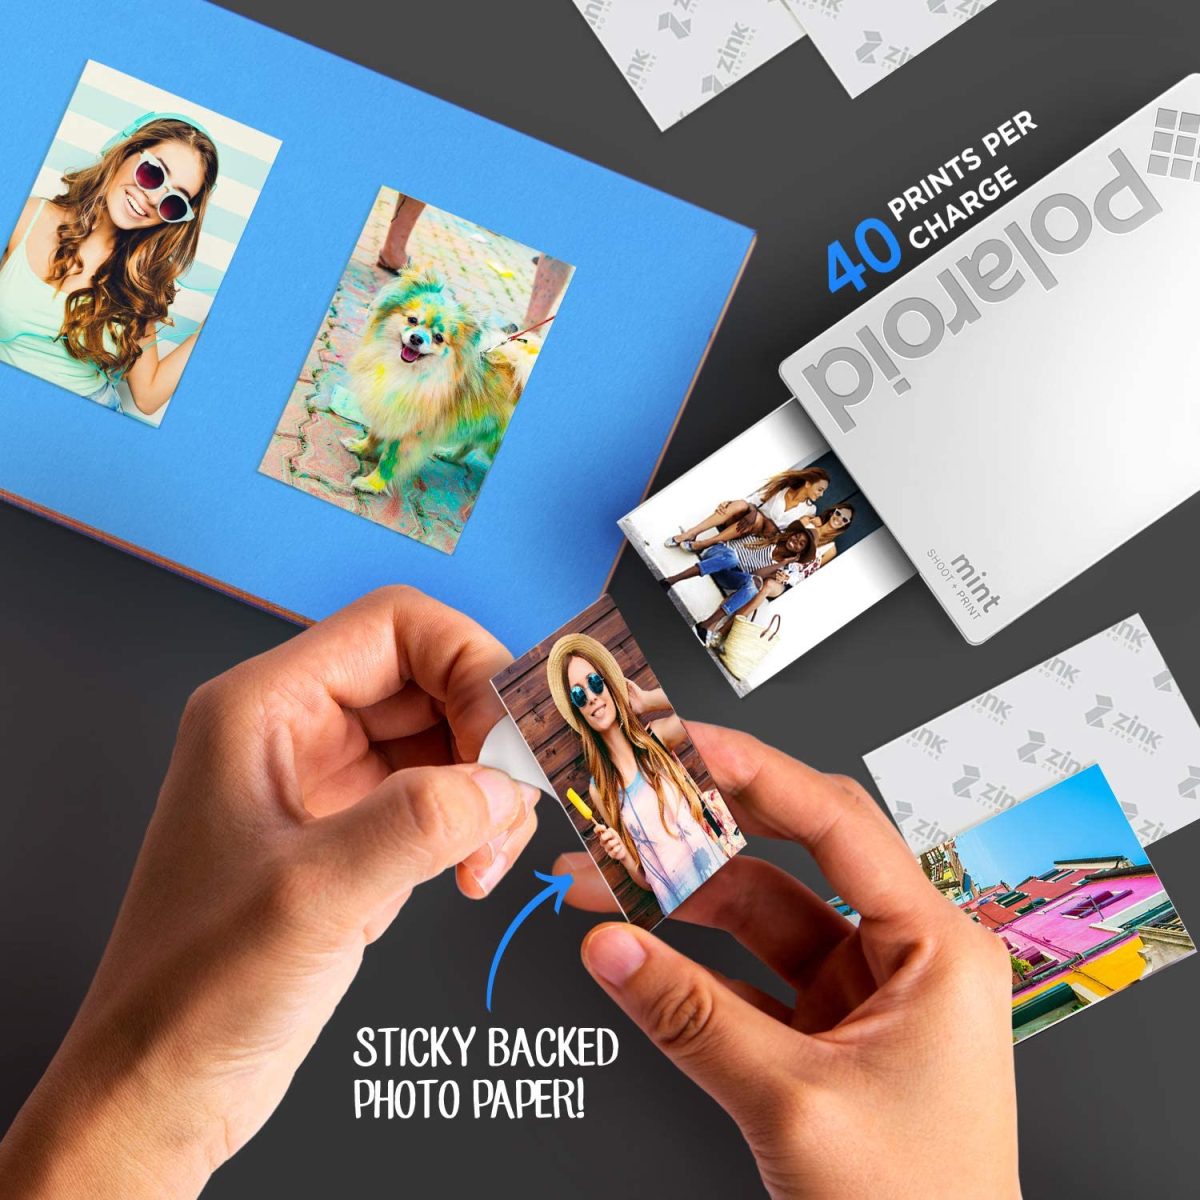 Polaroid Https://Www.youtube.com/Watch?V=Oqivlsmvng8 &Lt;Div Id=&Quot;Featurebullets_Feature_Div&Quot; Class=&Quot;Celwidget&Quot; Data-Feature-Name=&Quot;Featurebullets&Quot; Data-Cel-Widget=&Quot;Featurebullets_Feature_Div&Quot;&Gt; &Lt;Div Id=&Quot;Feature-Bullets&Quot; Class=&Quot;A-Section A-Spacing-Medium A-Spacing-Top-Small&Quot;&Gt; &Lt;Ul Class=&Quot;A-Unordered-List A-Vertical A-Spacing-Mini&Quot;&Gt; &Lt;Li&Gt;&Lt;Span Class=&Quot;A-List-Item&Quot;&Gt;Awesome Handheld Device Lets You Take 16 Megapixel Photographs &Amp; Print Instantly On 2X3 Inches Sticky Back Paper&Lt;/Span&Gt;&Lt;/Li&Gt; &Lt;Li&Gt;&Lt;Span Class=&Quot;A-List-Item&Quot;&Gt;Innovative Zero Ink Technology : There’s No Need For Pricy Toner; Zink Cartridges Combine Paper &Amp; Ink All; Packs Available In 20, 30 Or 50 Sheets&Lt;/Span&Gt;&Lt;/Li&Gt; &Lt;Li&Gt;&Lt;Span Class=&Quot;A-List-Item&Quot;&Gt;Unique Vertical Orientation : Modern Design Lets You Snap Upright, Just Like A Smartphone&Lt;/Span&Gt;&Lt;/Li&Gt; &Lt;Li&Gt;&Lt;Span Class=&Quot;A-List-Item&Quot;&Gt;A Mode For Every Mood : Simple Operation &Amp; Design Includes [6] Easy Picture Settings; Choose From Vibrant Color, Black &Amp; White Or Vintage Effect&Lt;/Span&Gt;&Lt;/Li&Gt; &Lt;Li&Gt;&Lt;Span Class=&Quot;A-List-Item&Quot;&Gt;Fashion Forward &Amp; Travel Friendly : Pick From [5] Fabulously Vibrant Colors; Pocket Sized Camera Measures 4. 6 X 3. 1 X 0. 8 Inches &Amp; Weighs Only 6 Ounces&Lt;/Span&Gt;&Lt;/Li&Gt; &Lt;Li&Gt;&Lt;Span Class=&Quot;A-List-Item&Quot;&Gt;Viewfinder Type: Optical&Lt;/Span&Gt;&Lt;/Li&Gt; &Lt;/Ul&Gt; &Lt;/Div&Gt; &Lt;/Div&Gt; Polaroid Mint Polaroid Mint Instant Print Digital Camera - Red